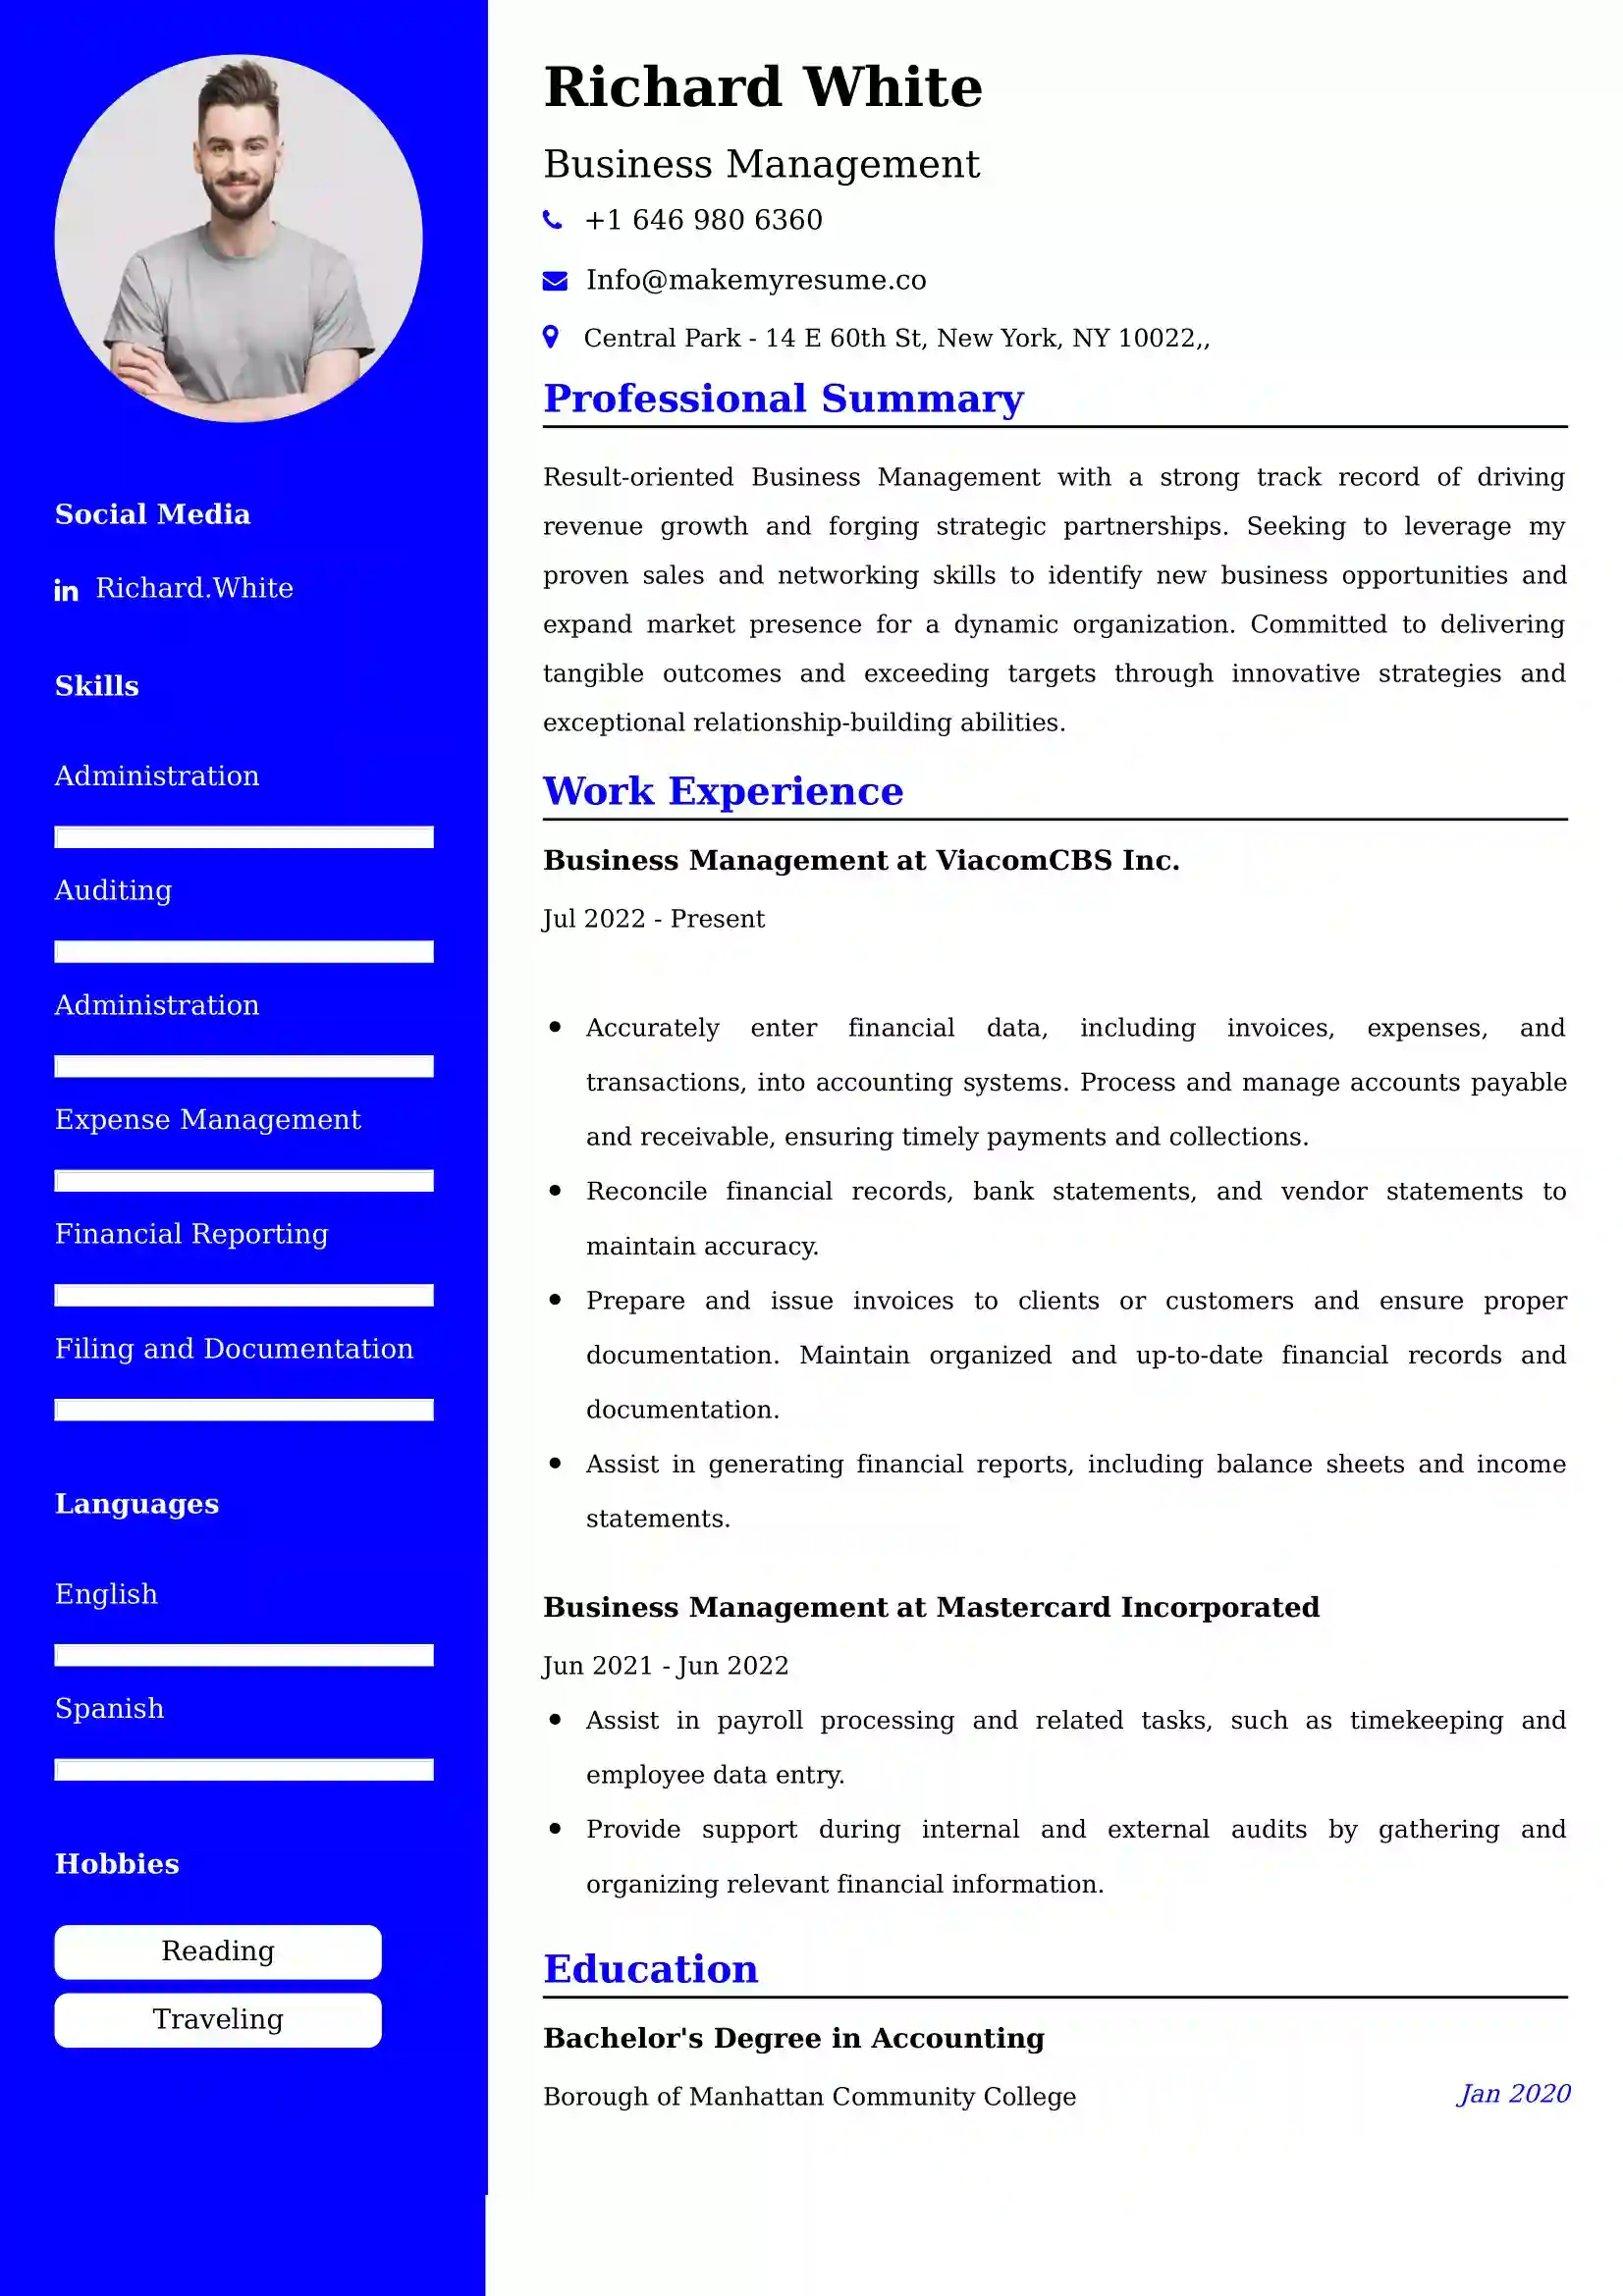 Business Management Resume Examples - Brazilian Format, Latest Template